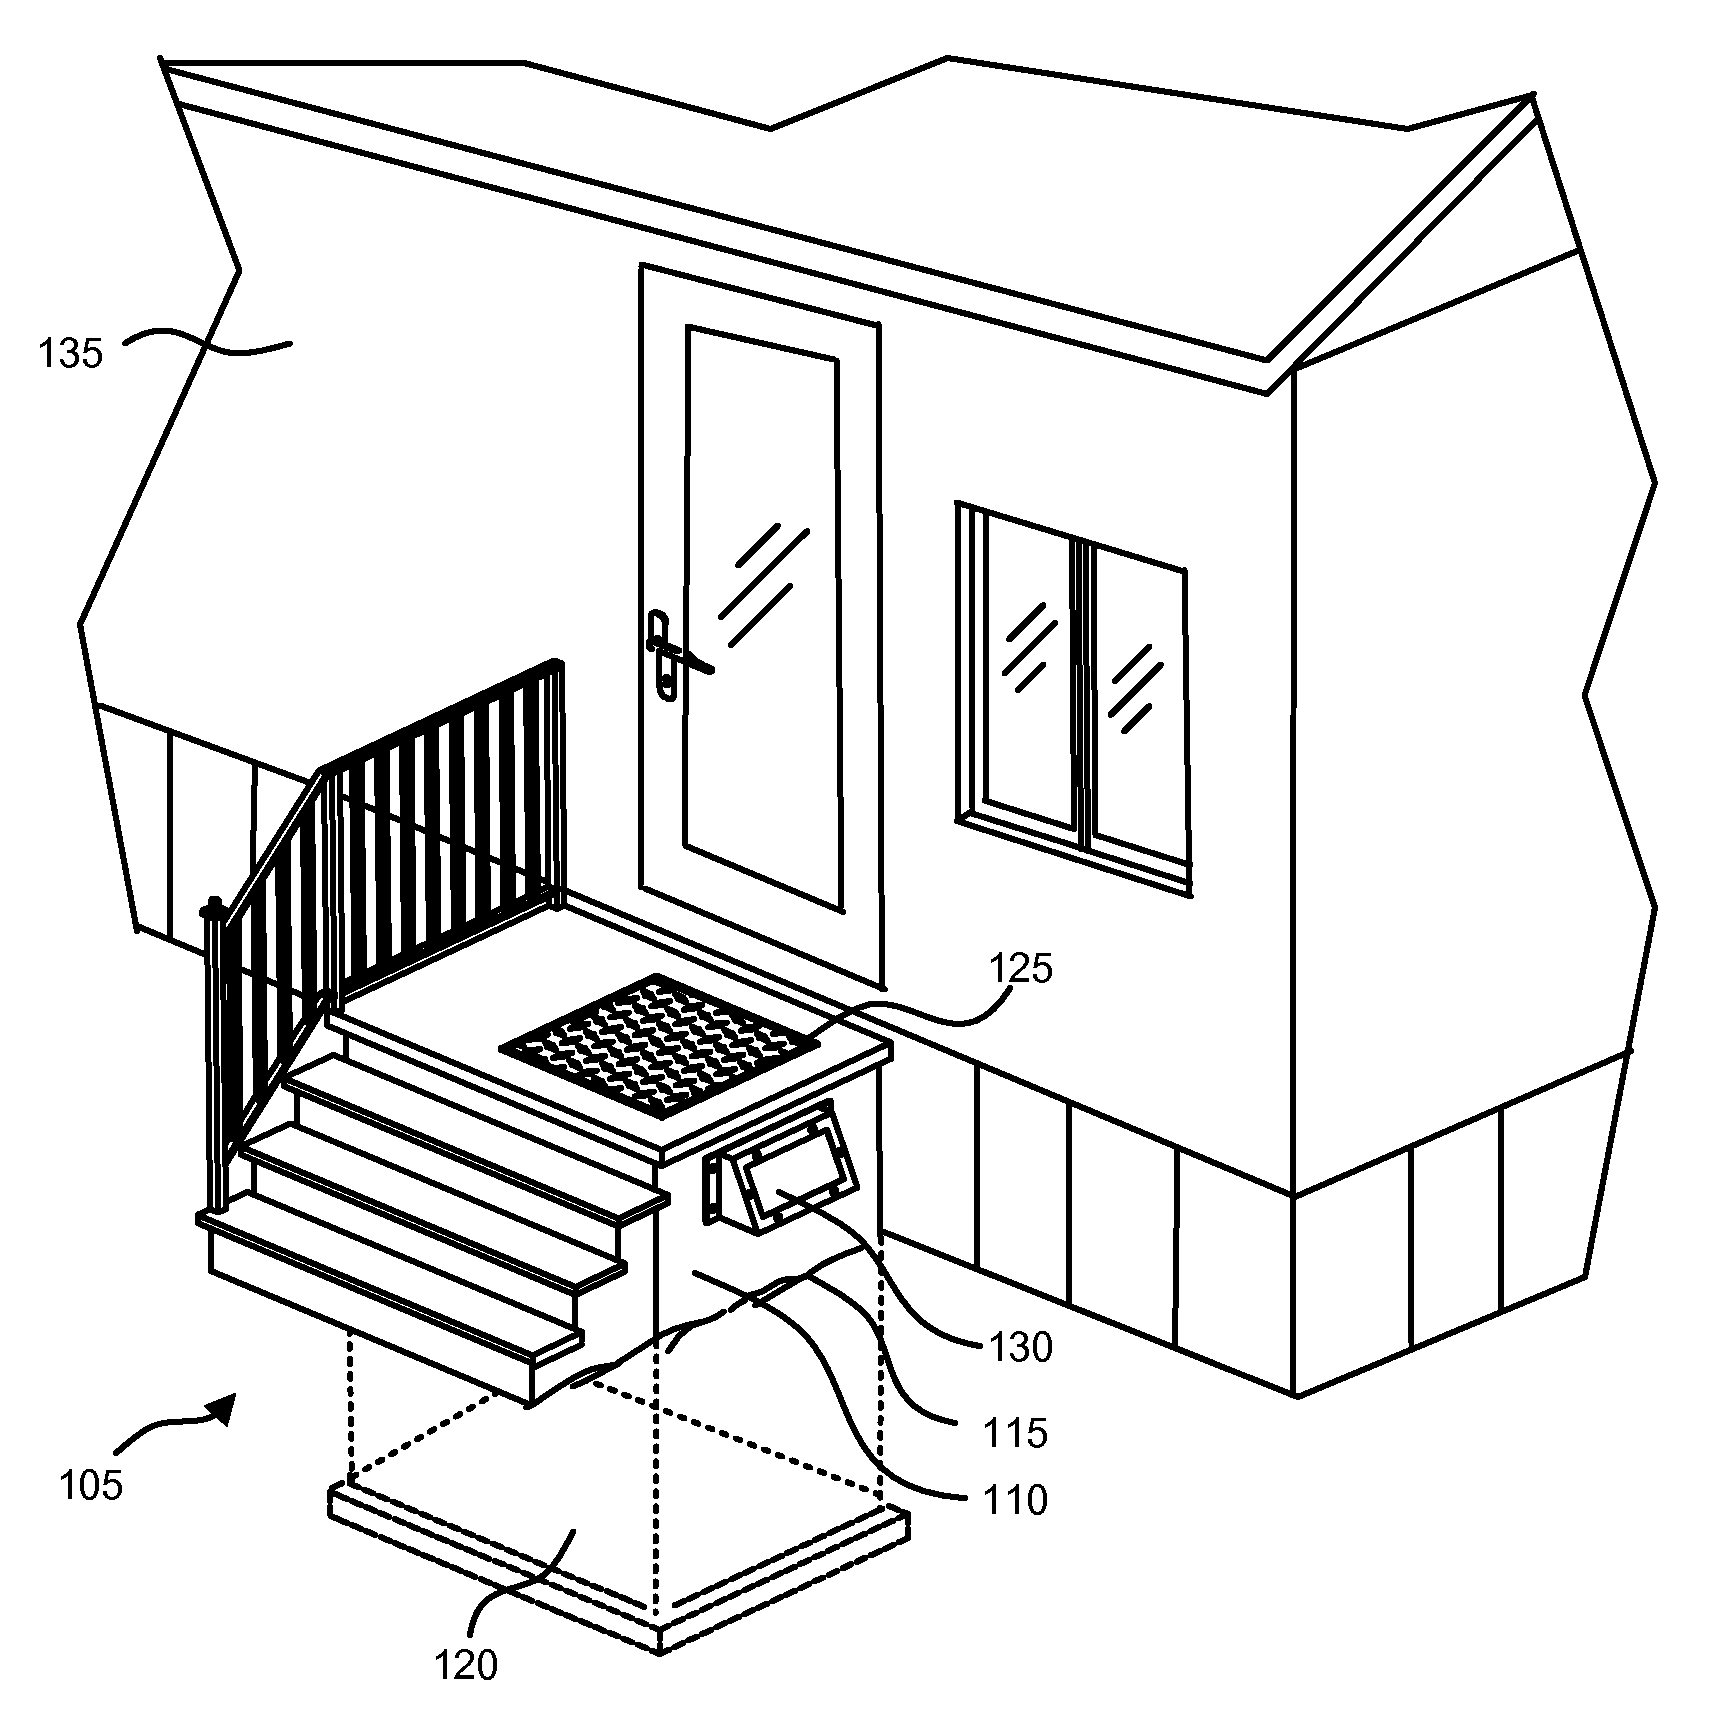 Storm shelter and components thereof